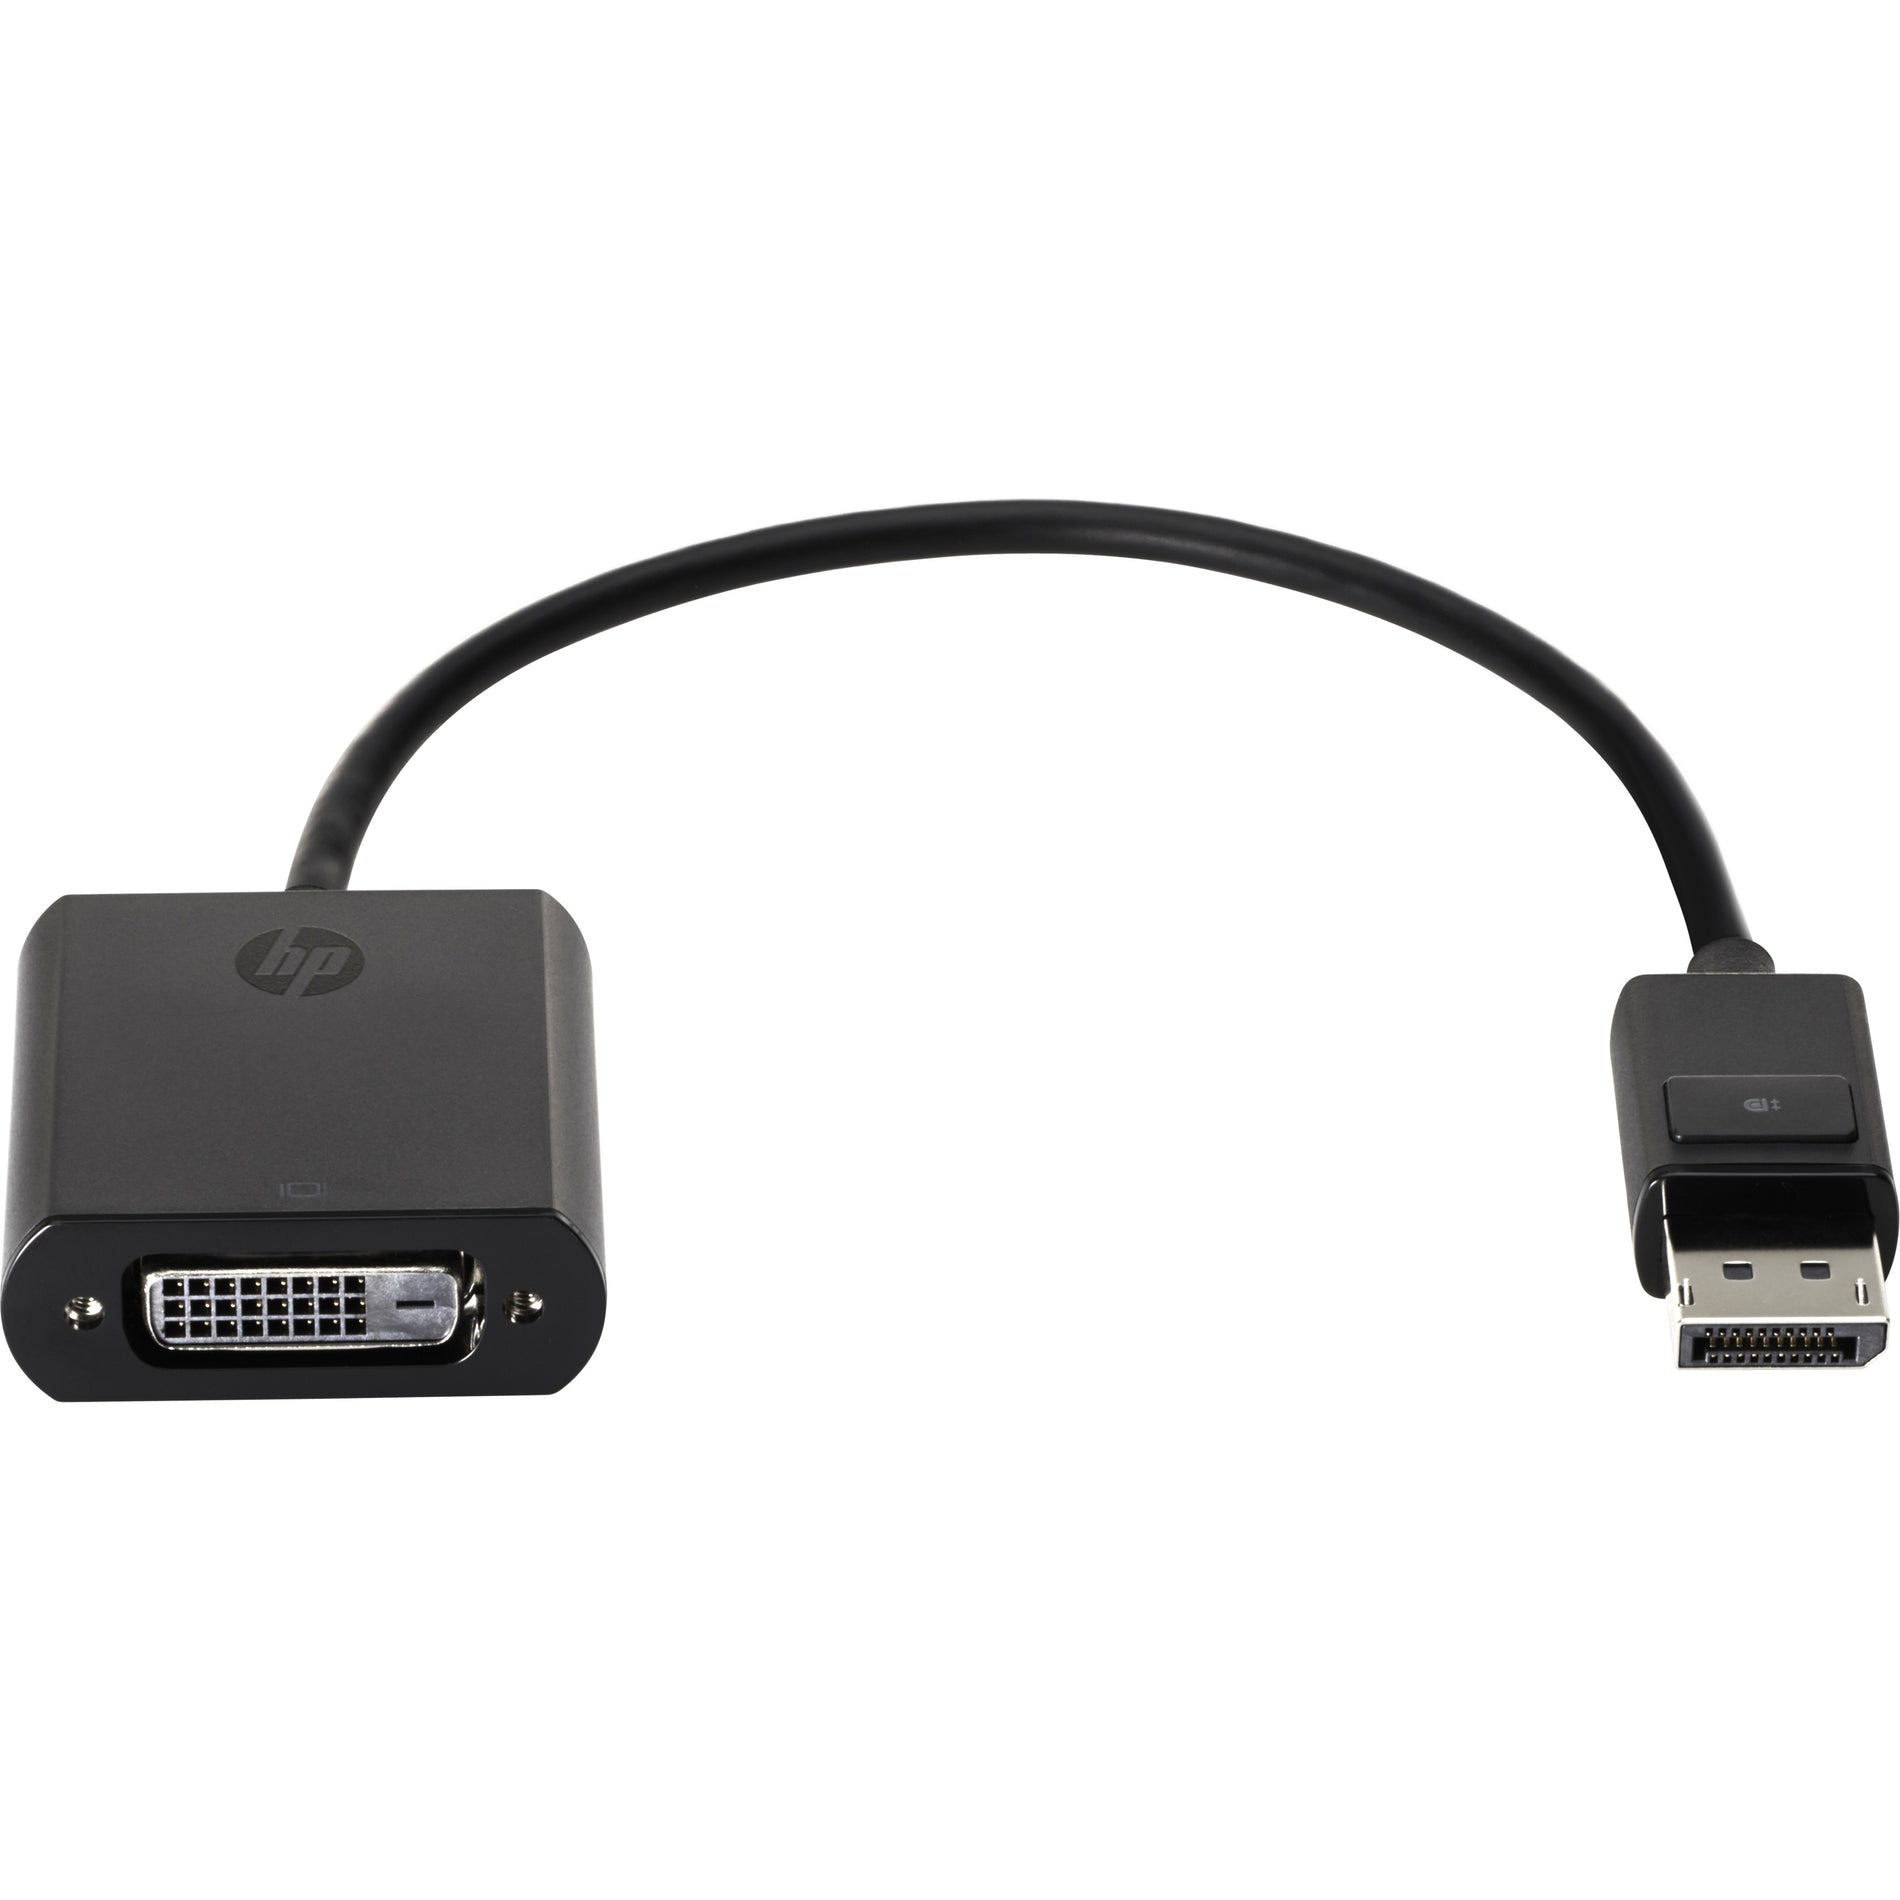 HP FH973AA DisplayPort to DVI-D Adapter, Video Cable for Enhanced Display Connectivity